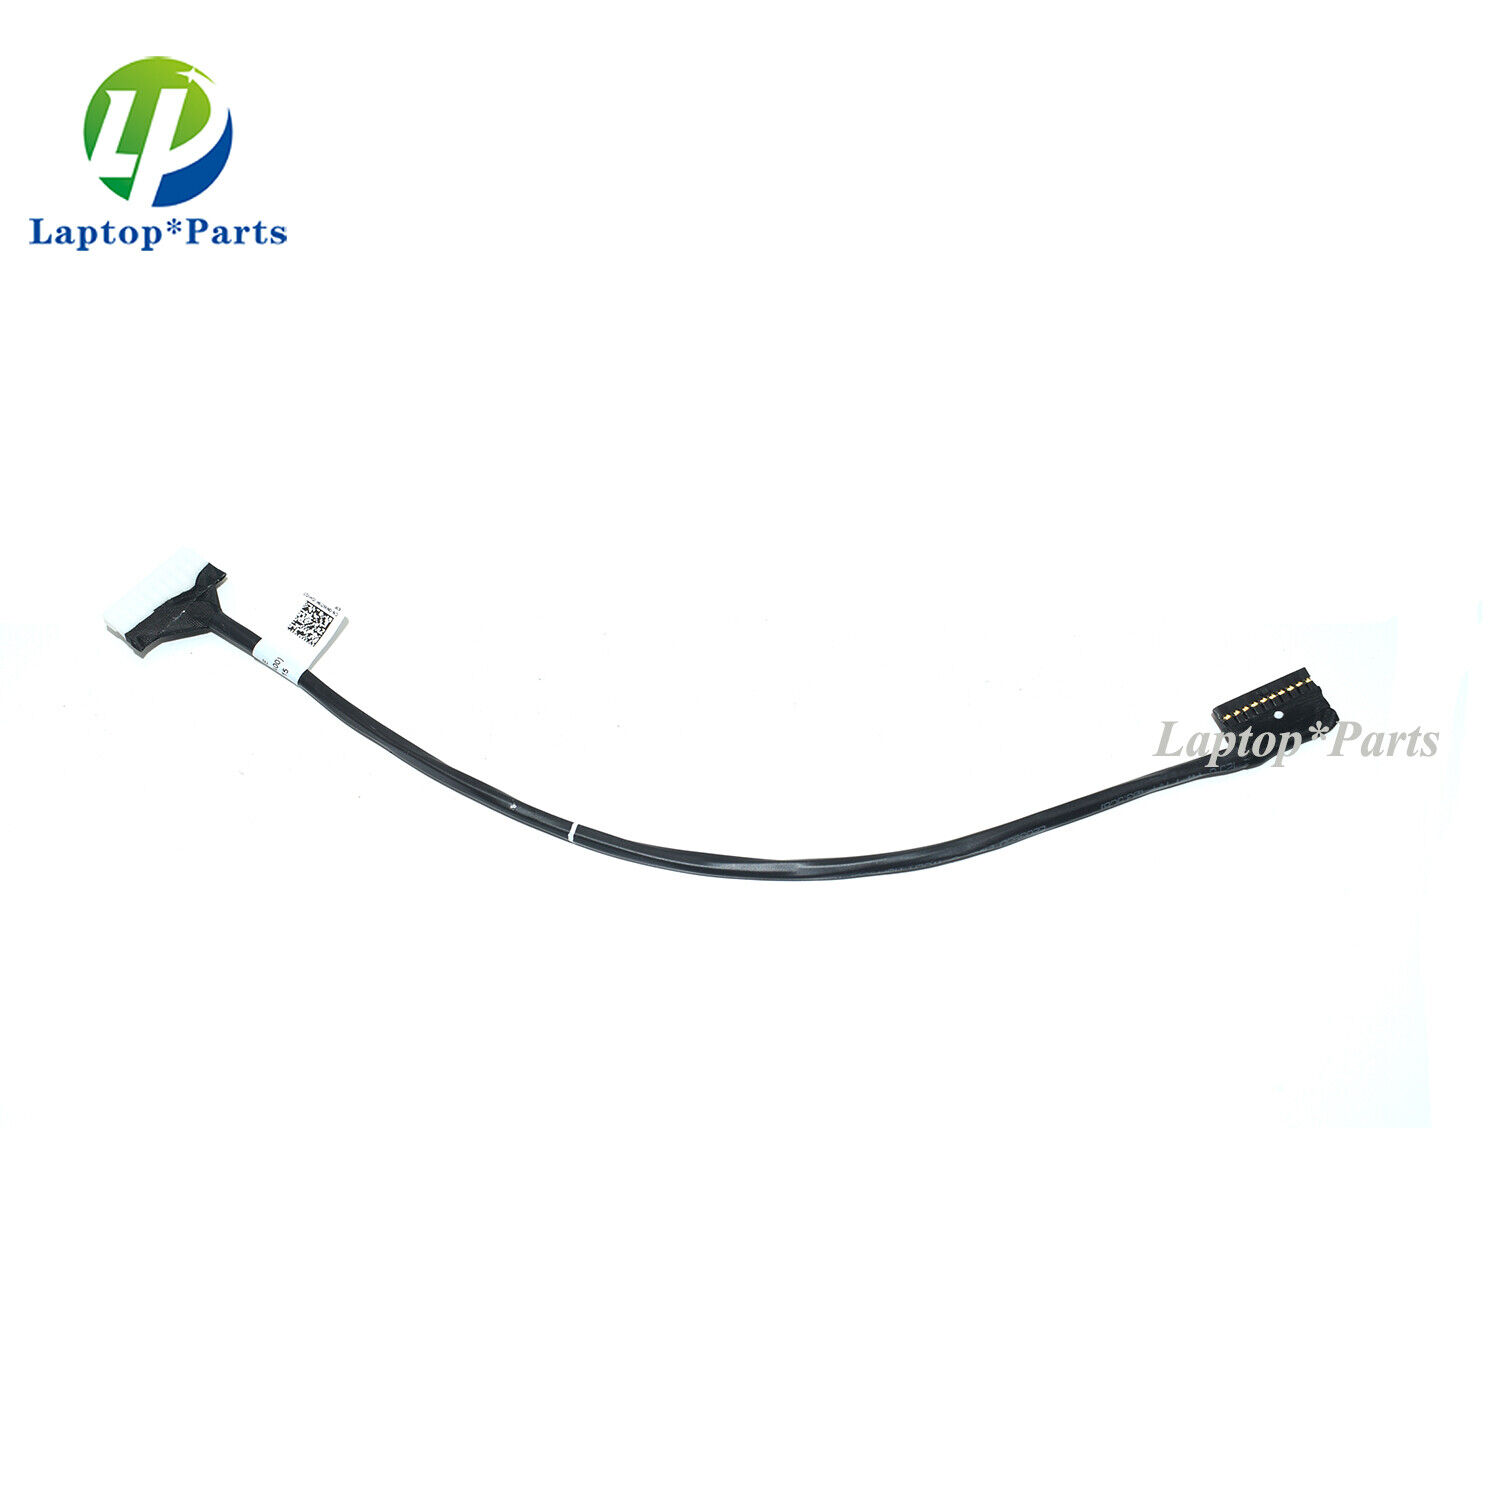 New Battery Connect Cable For Dell Latitude E5550 DC02001WV00 0NWD9K 